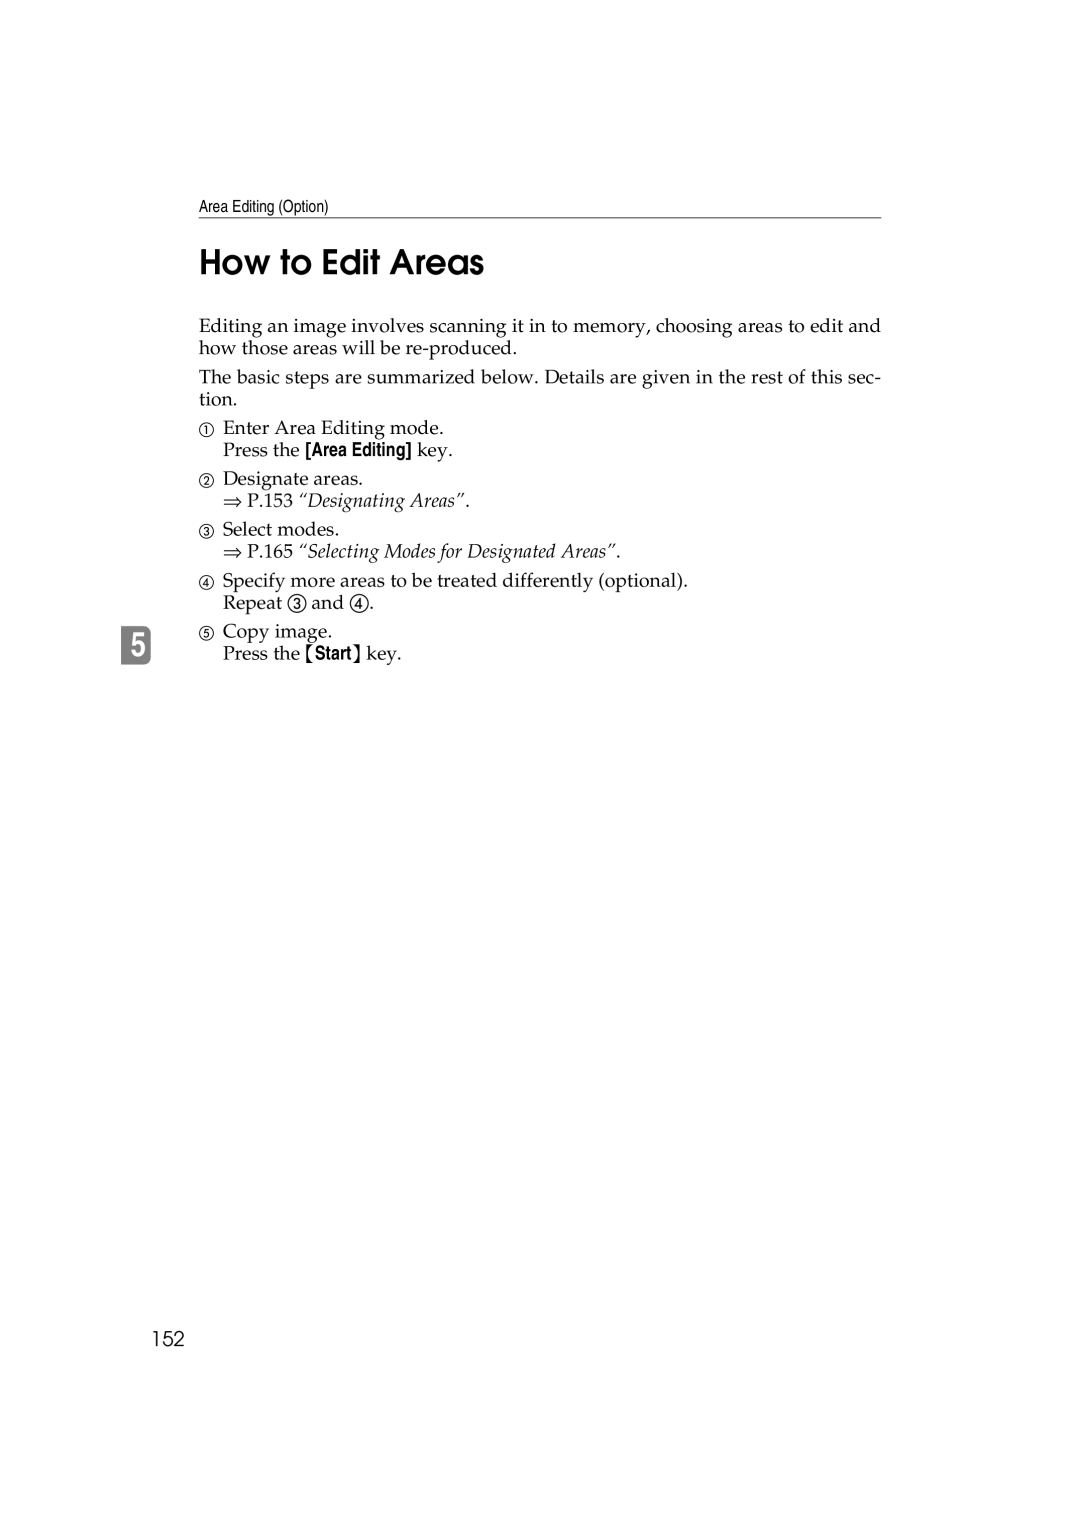 Ricoh 6513 manual How to Edit Areas, 152, Press the Area Editing key 